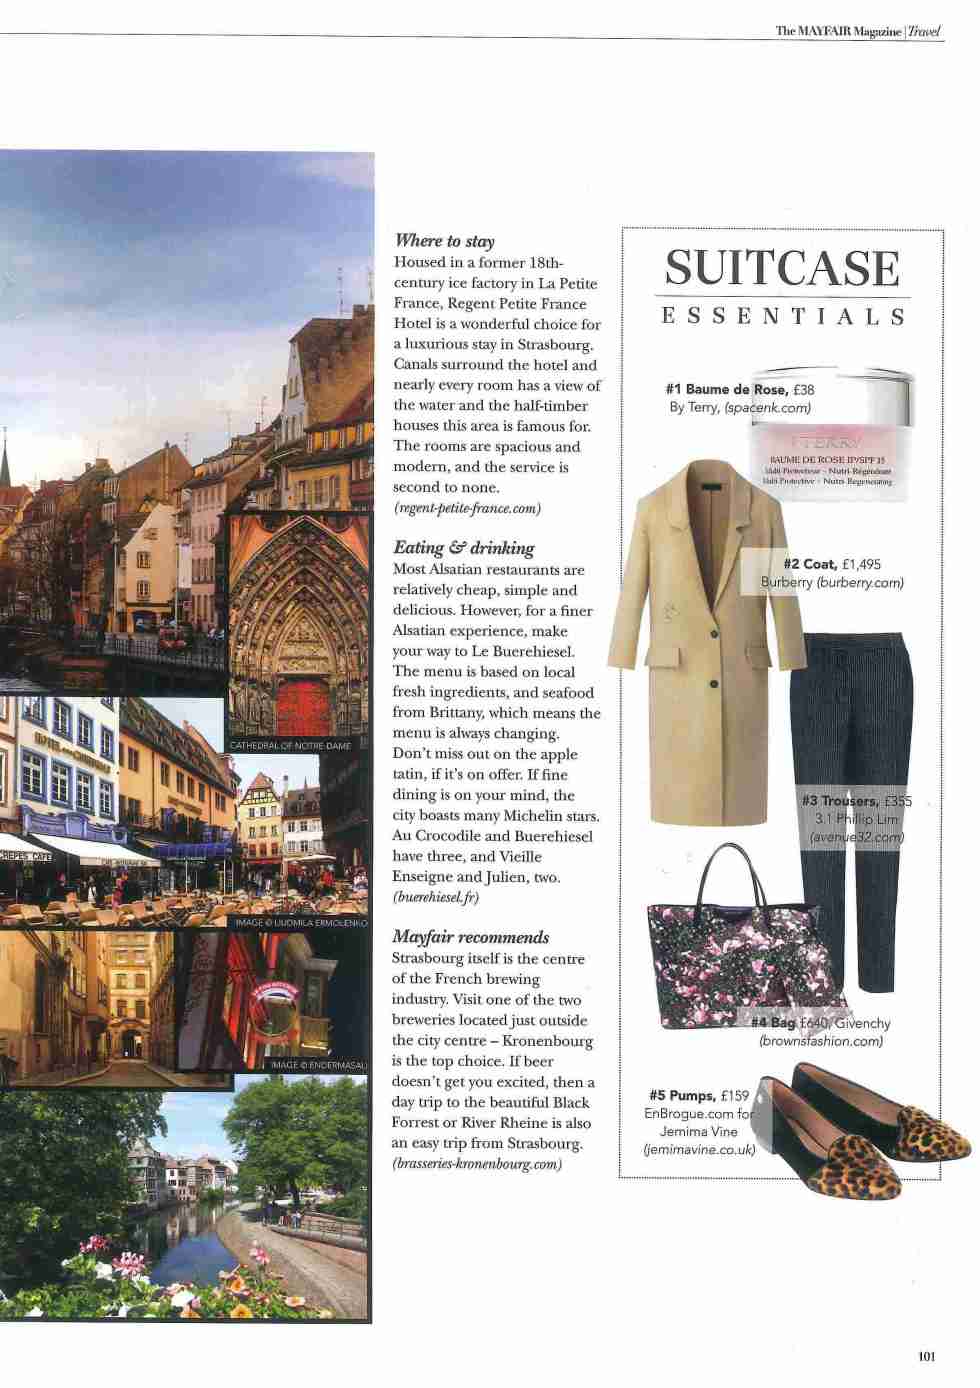 The Mayfair Magazine - April - Coverage